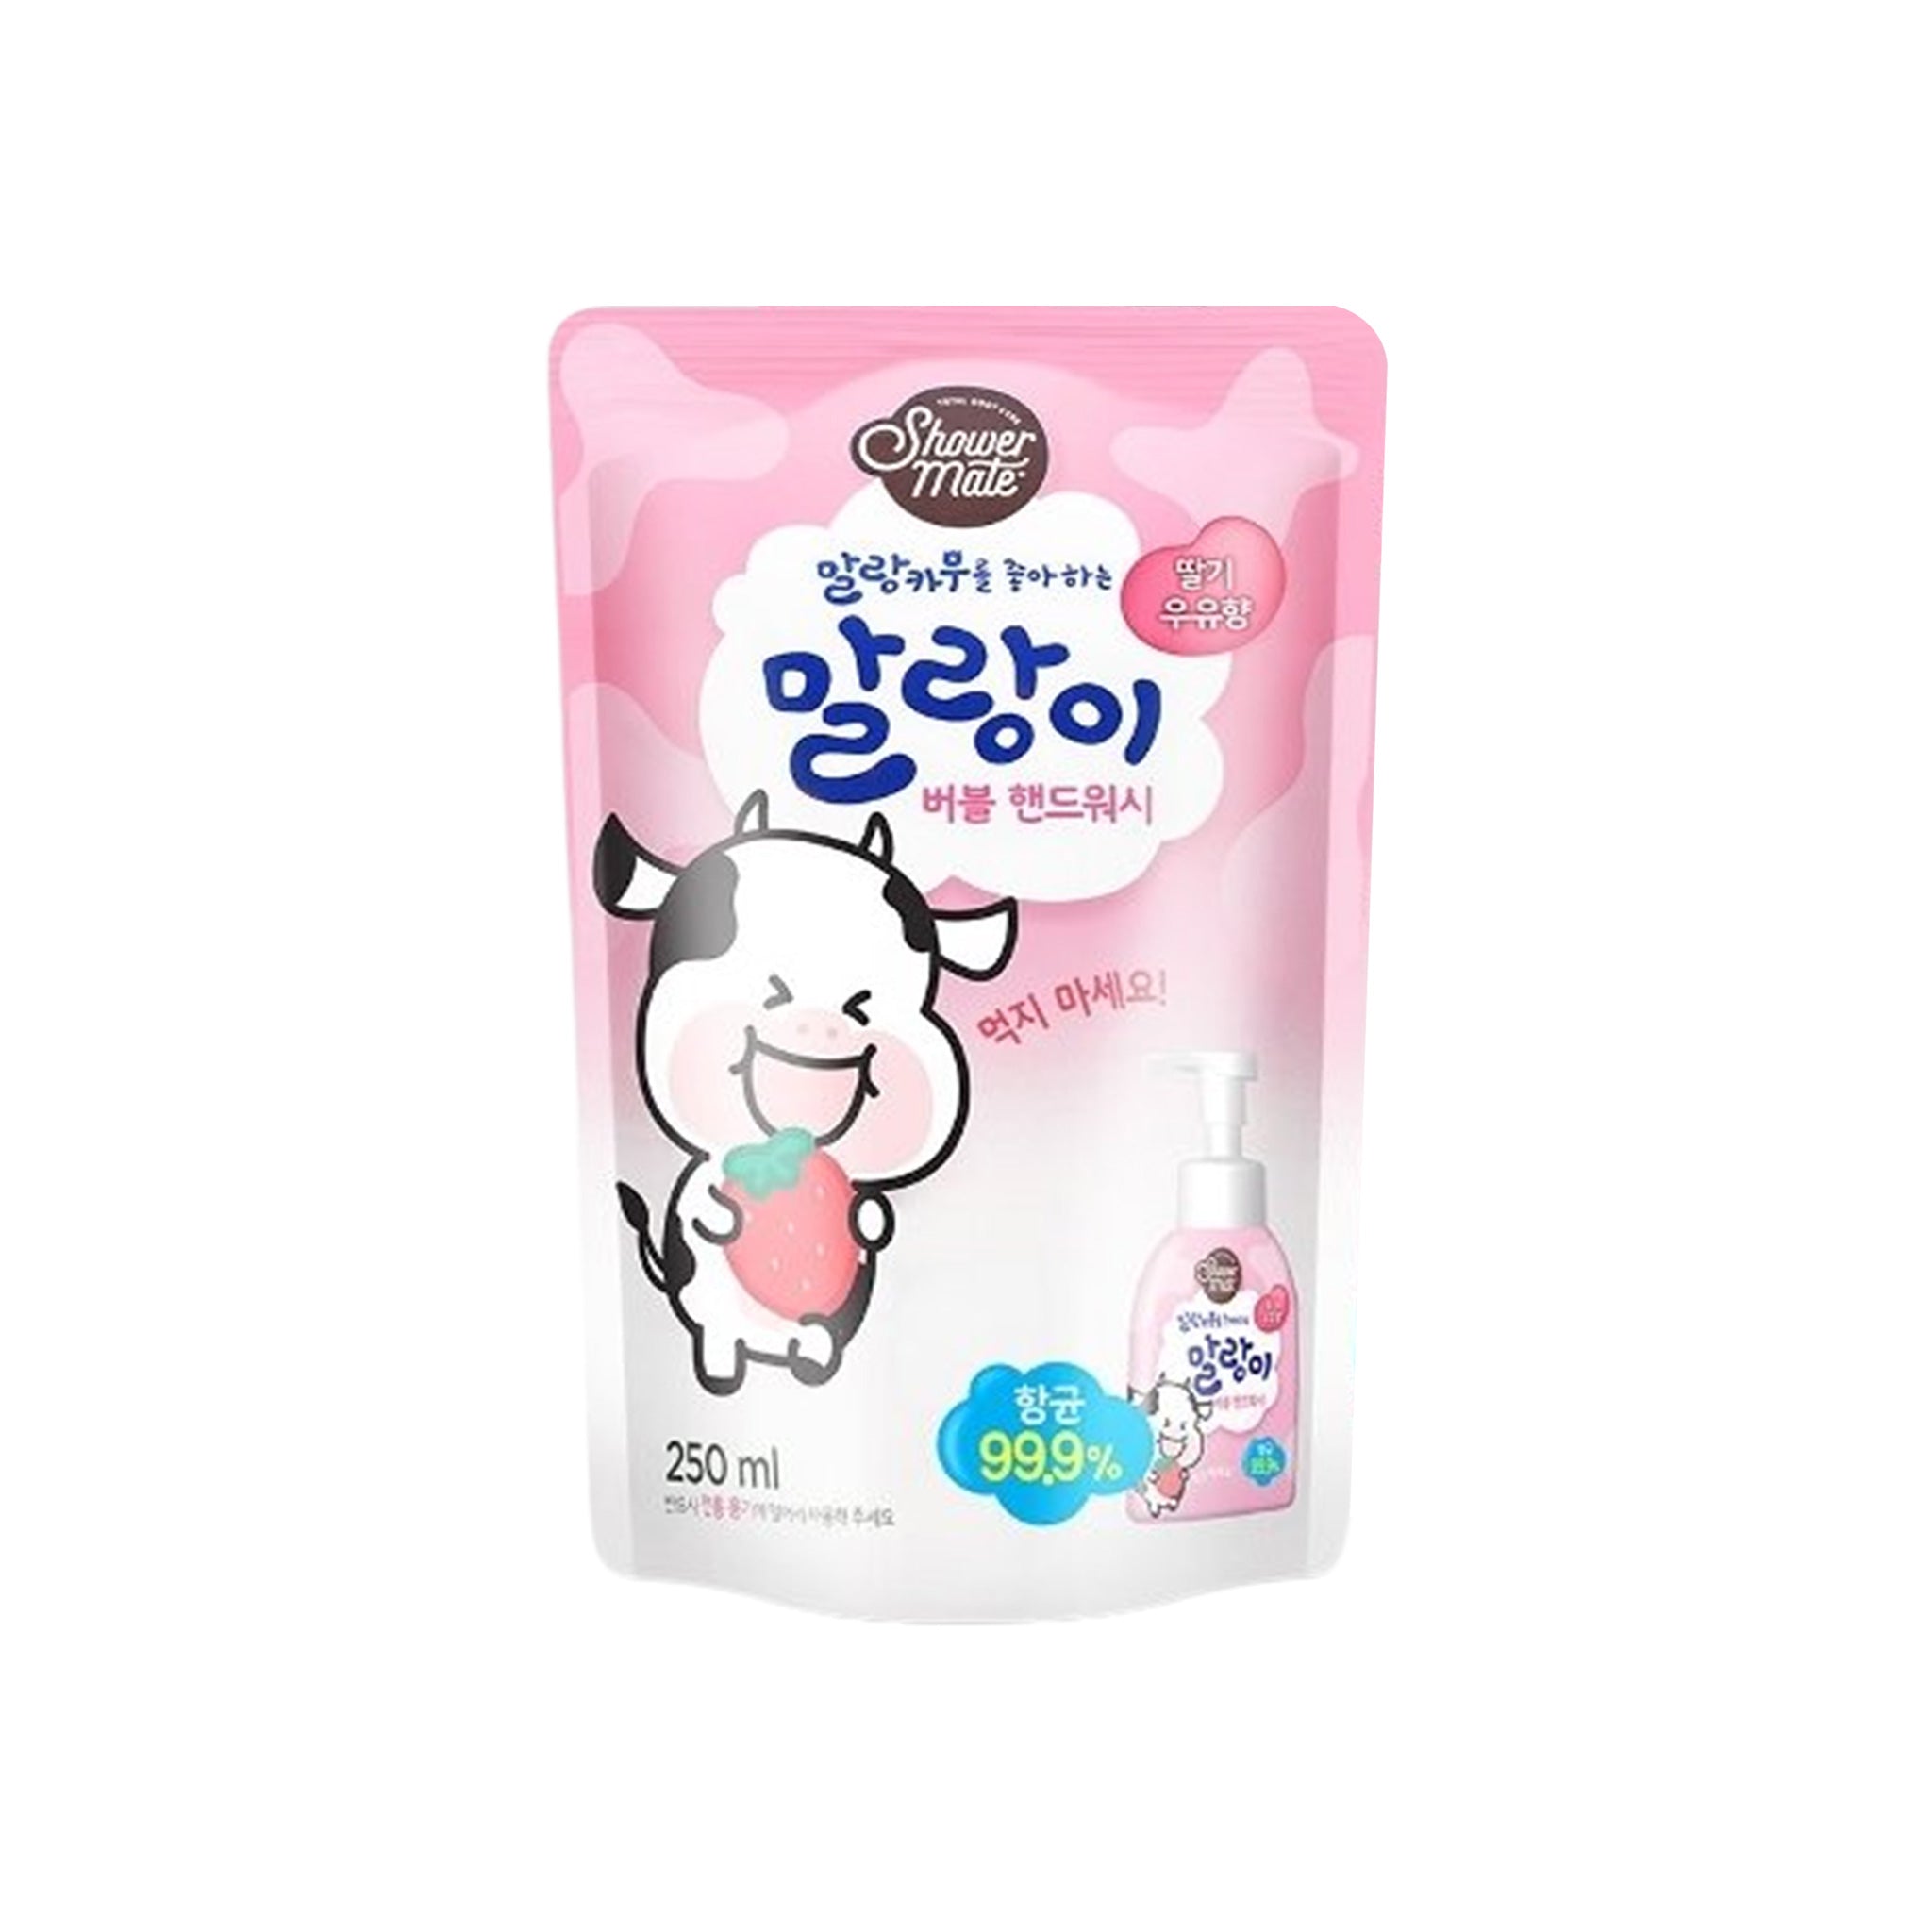 AEKYUNG Shower Mate Bubble Hand Wash Refill 250ml